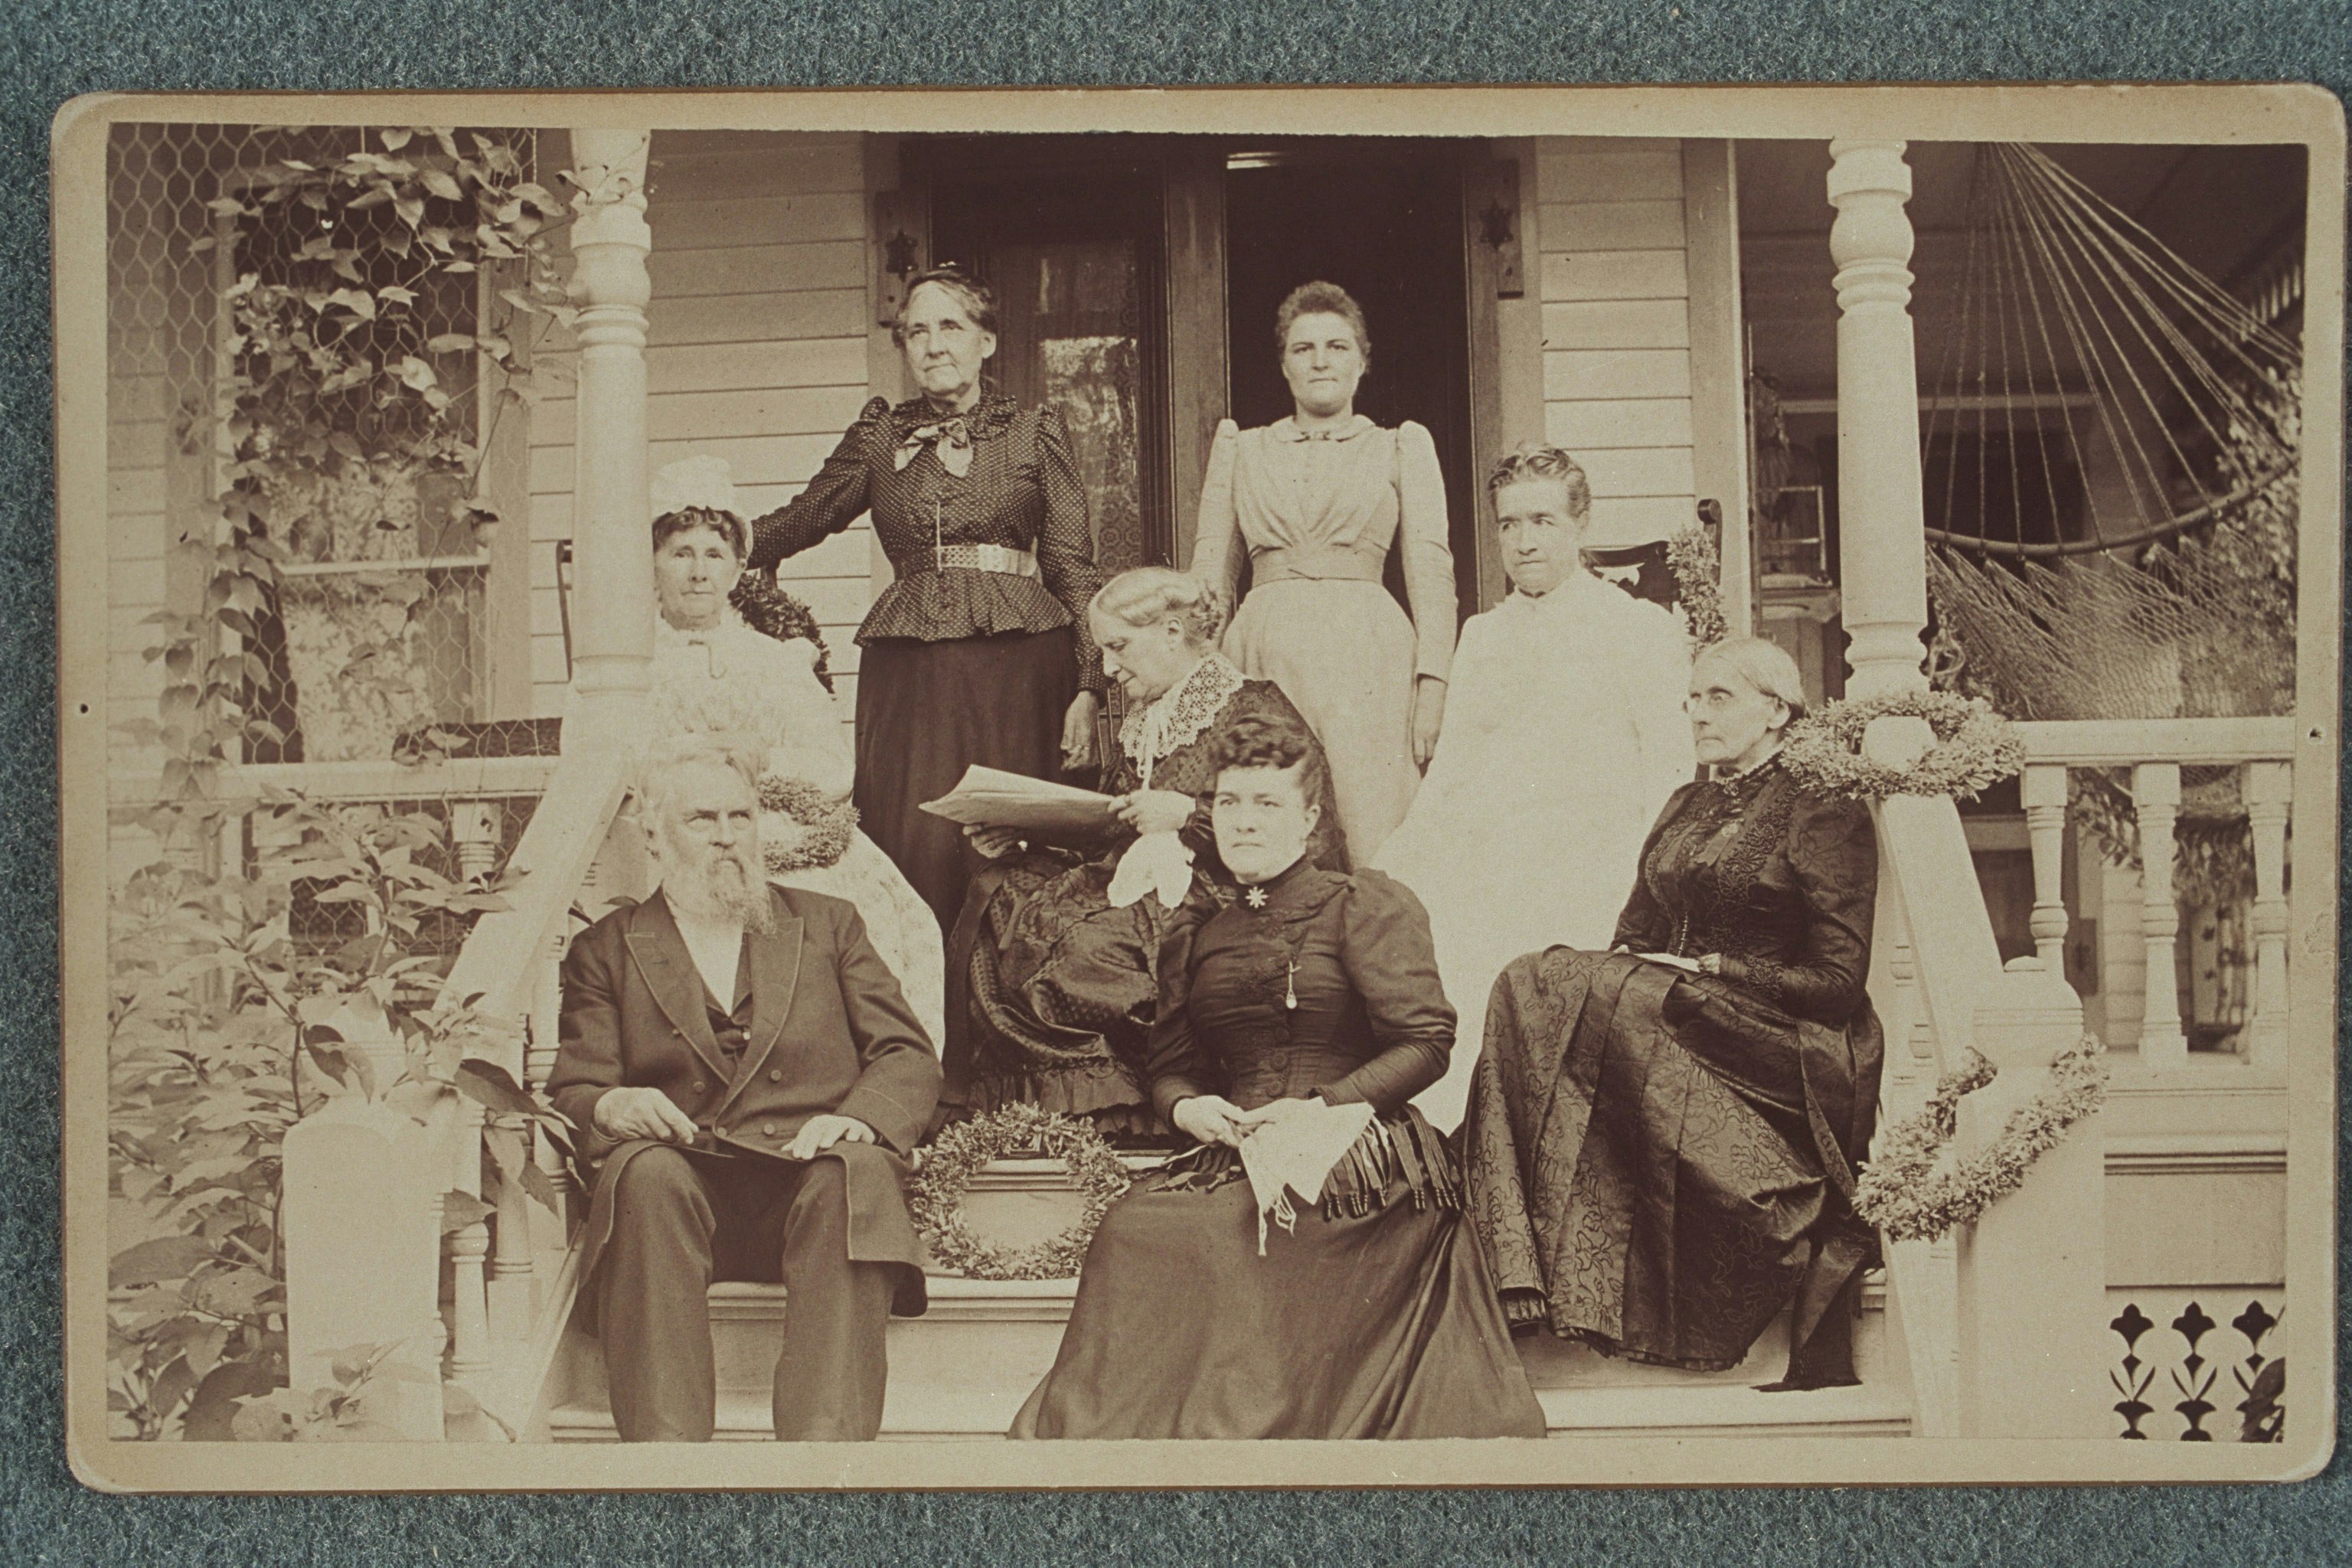 Susan B. Anthony and others, possibly members of the Anthony family, on porch